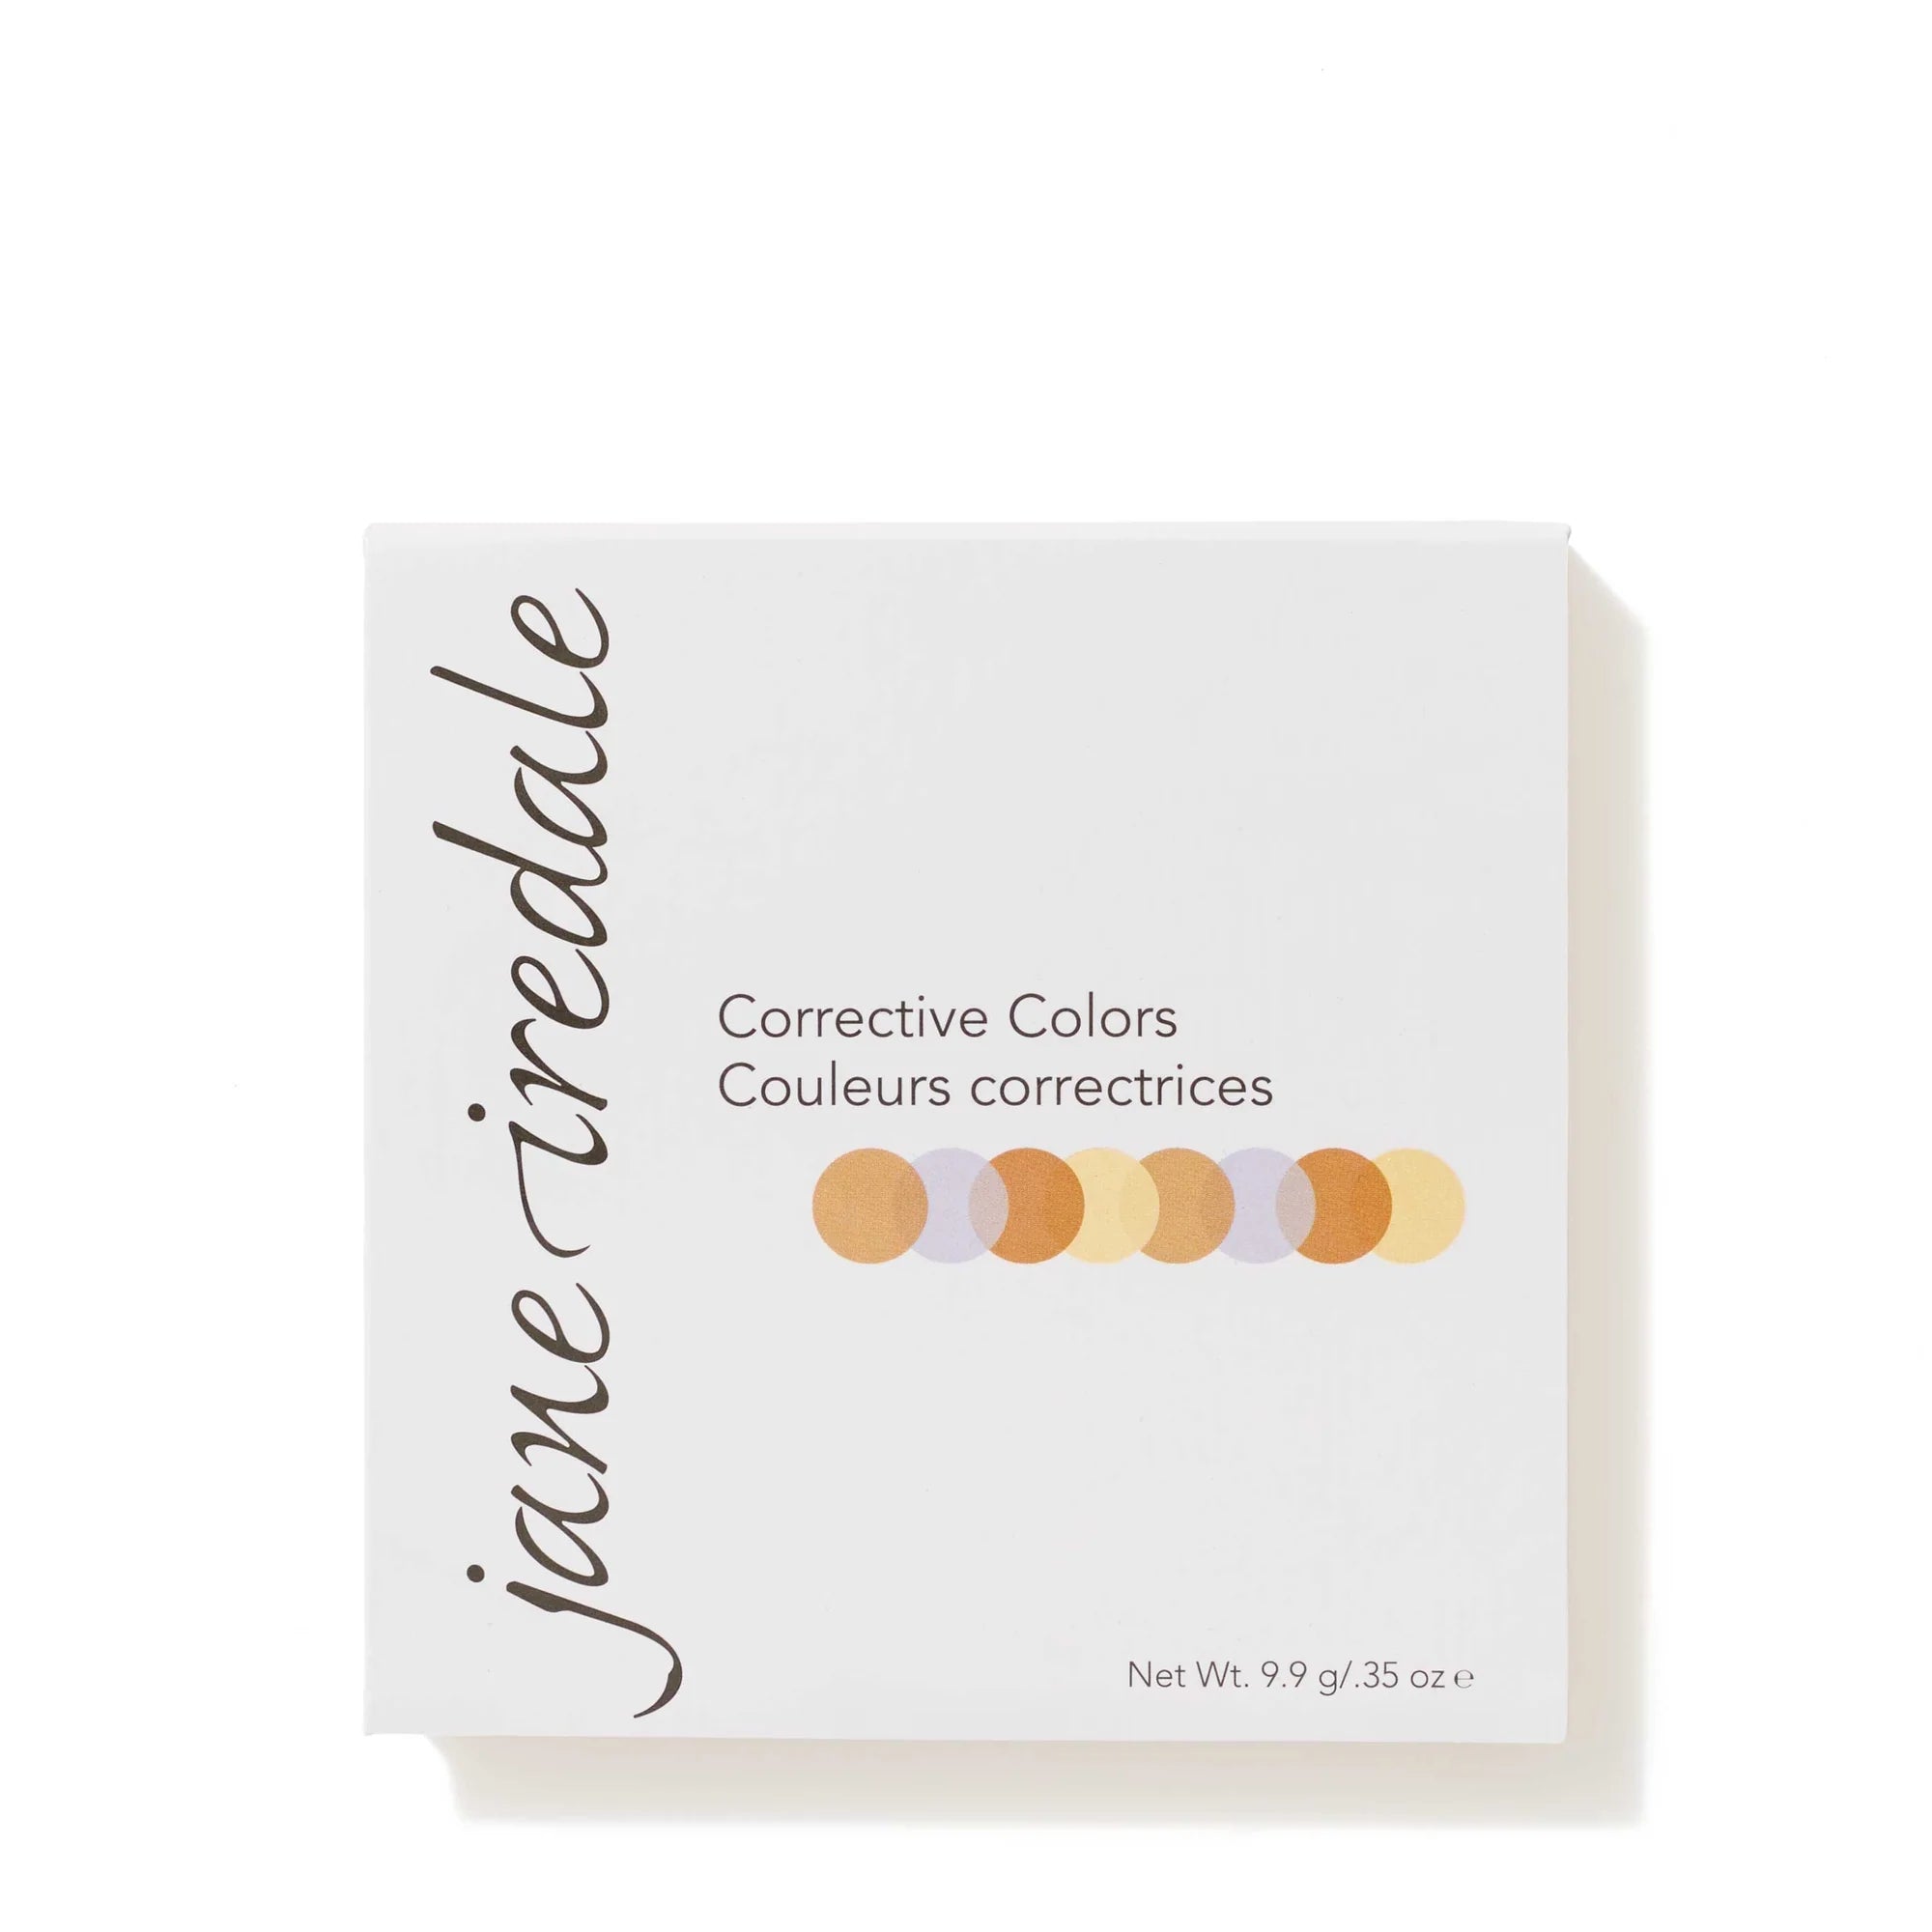 Jane Iredale's Corrective Colors has Four shades to correct and conceal discoloration. 